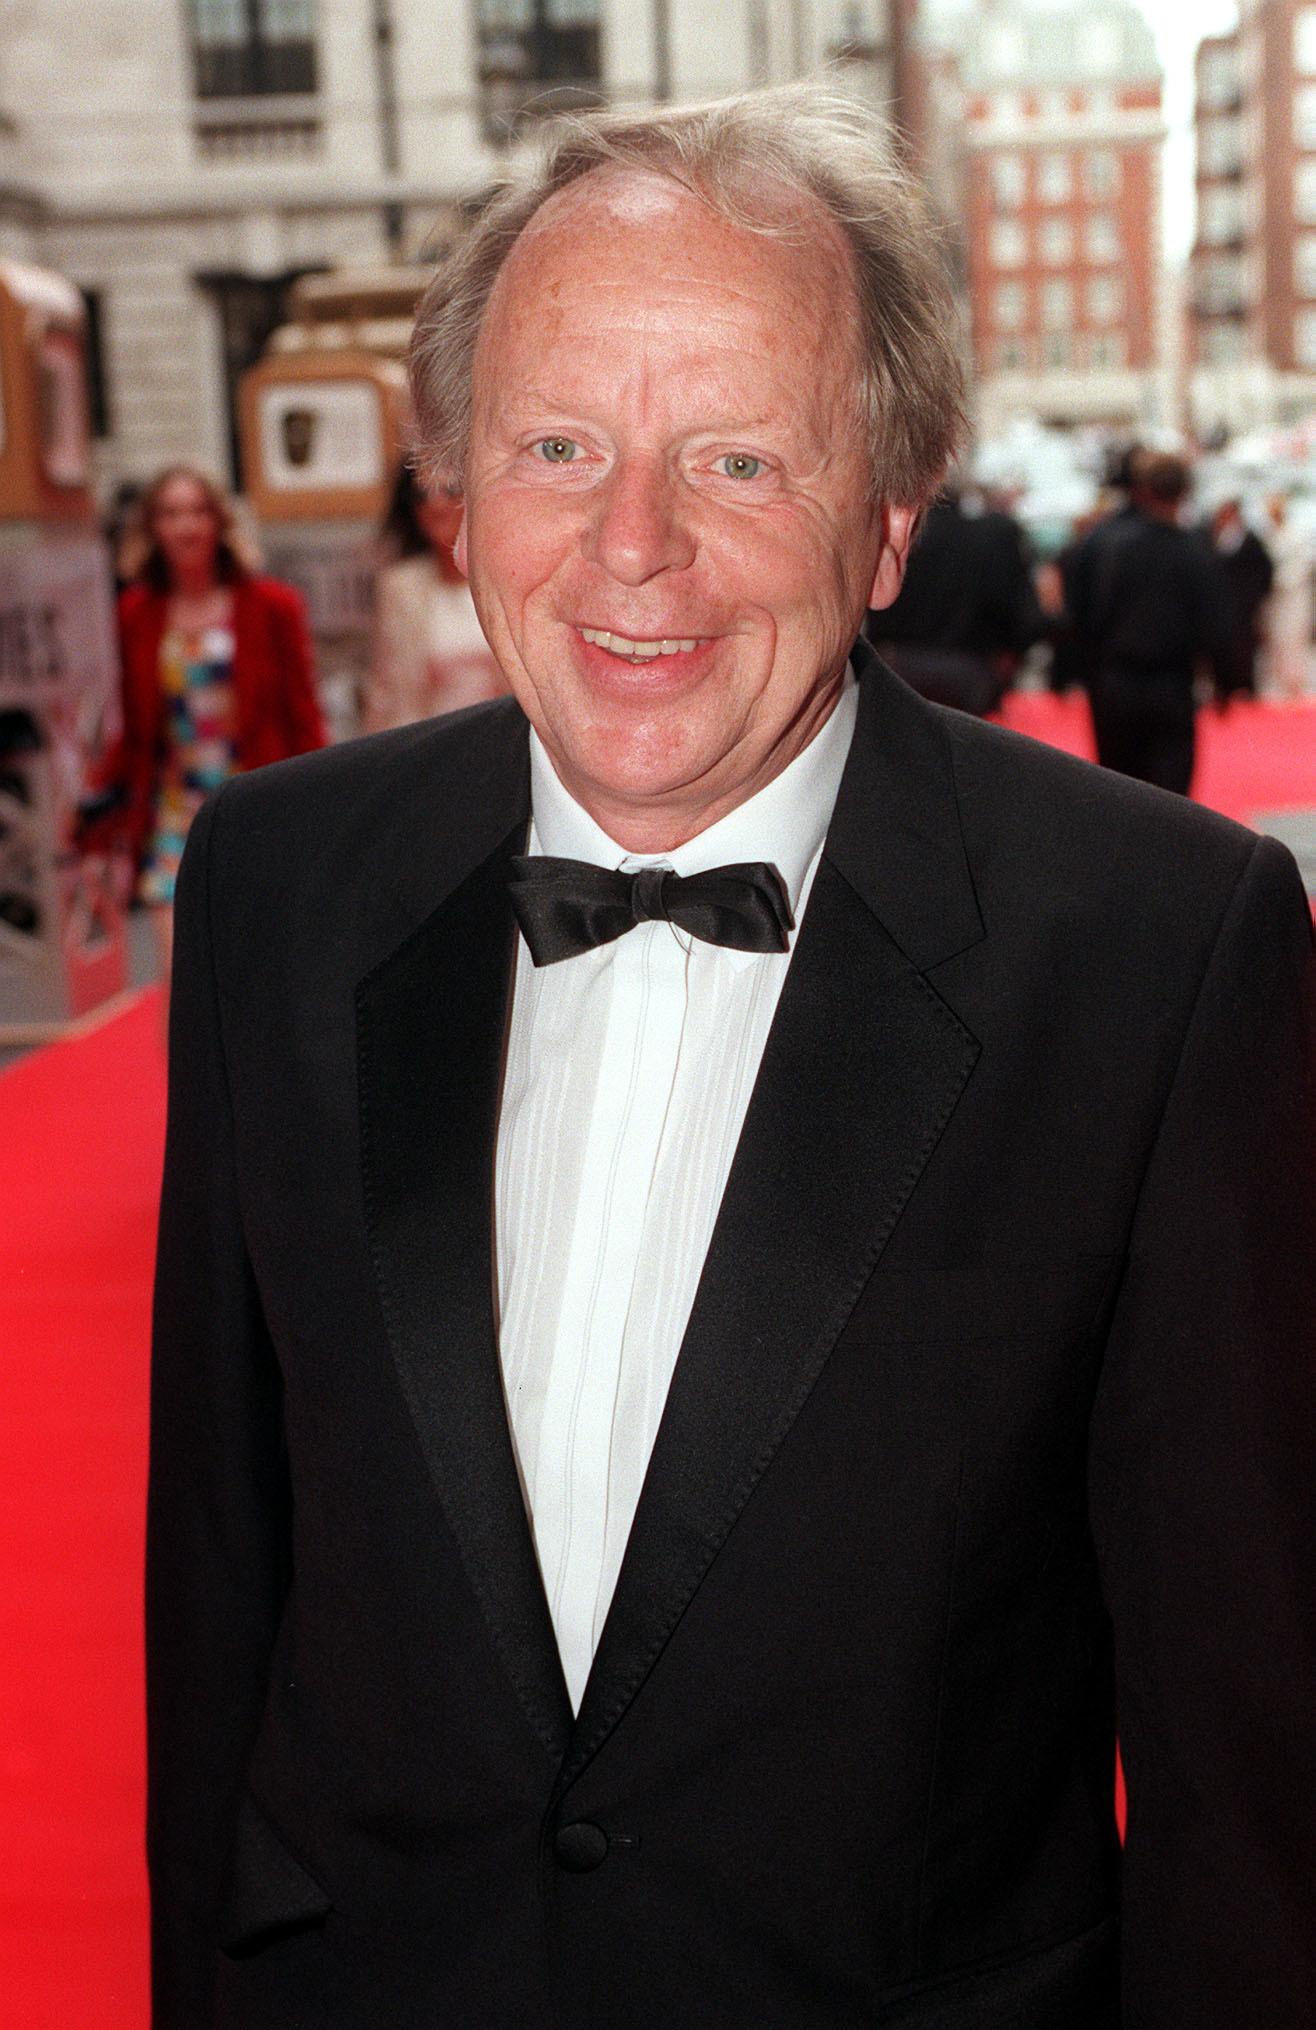 John Bird won a Bafta for his performance in The Long Johns in 1997 (Michael Walter/PA)
